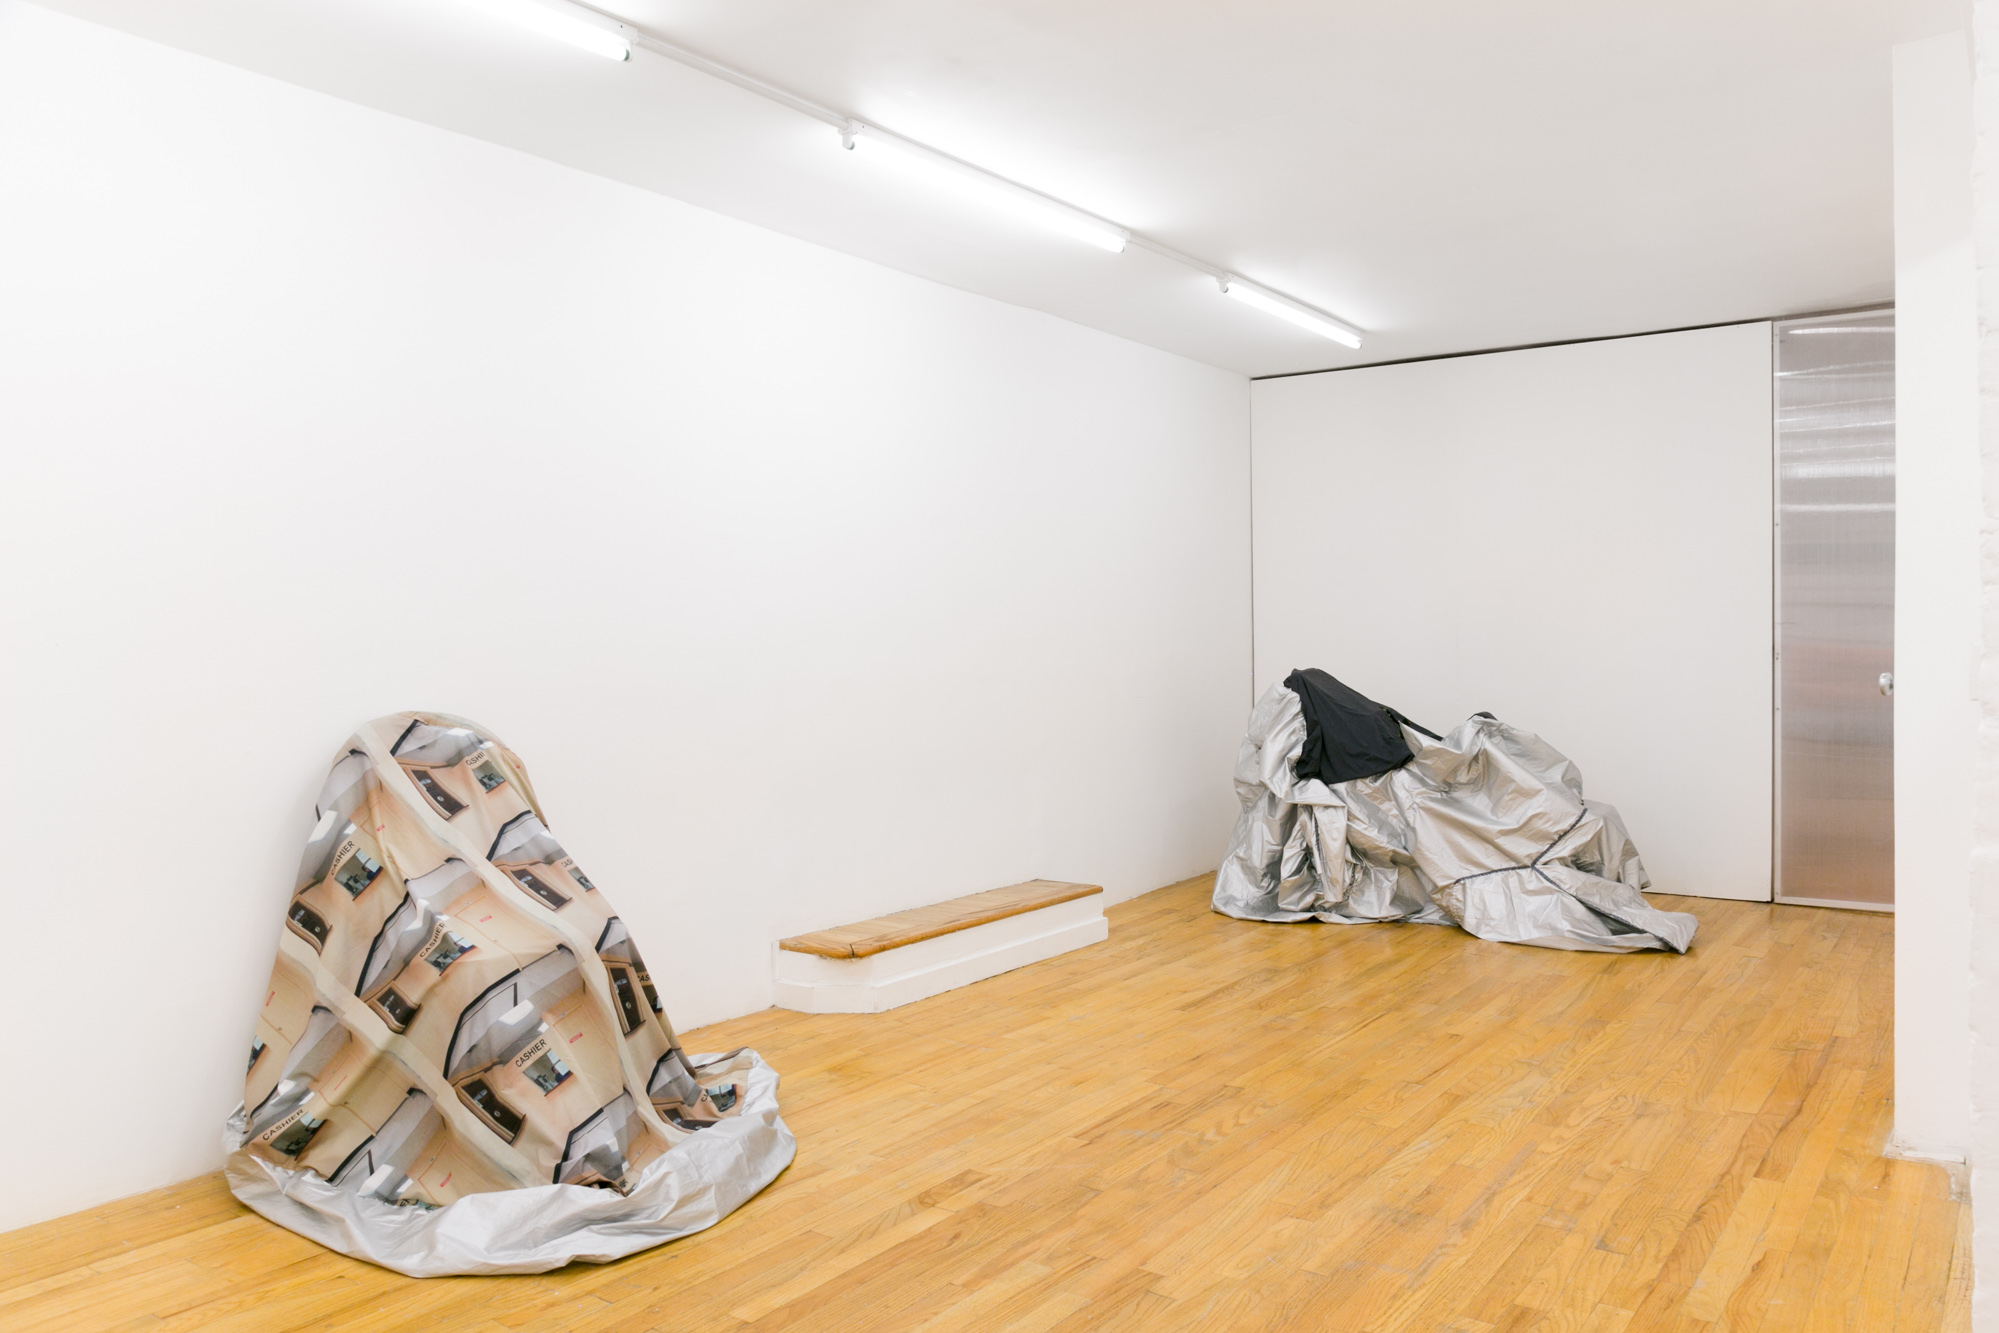  Installation view, Laura Hunt,  Motorcycle Covers , 2018, 321 Gallery, Brooklyn, NY. 